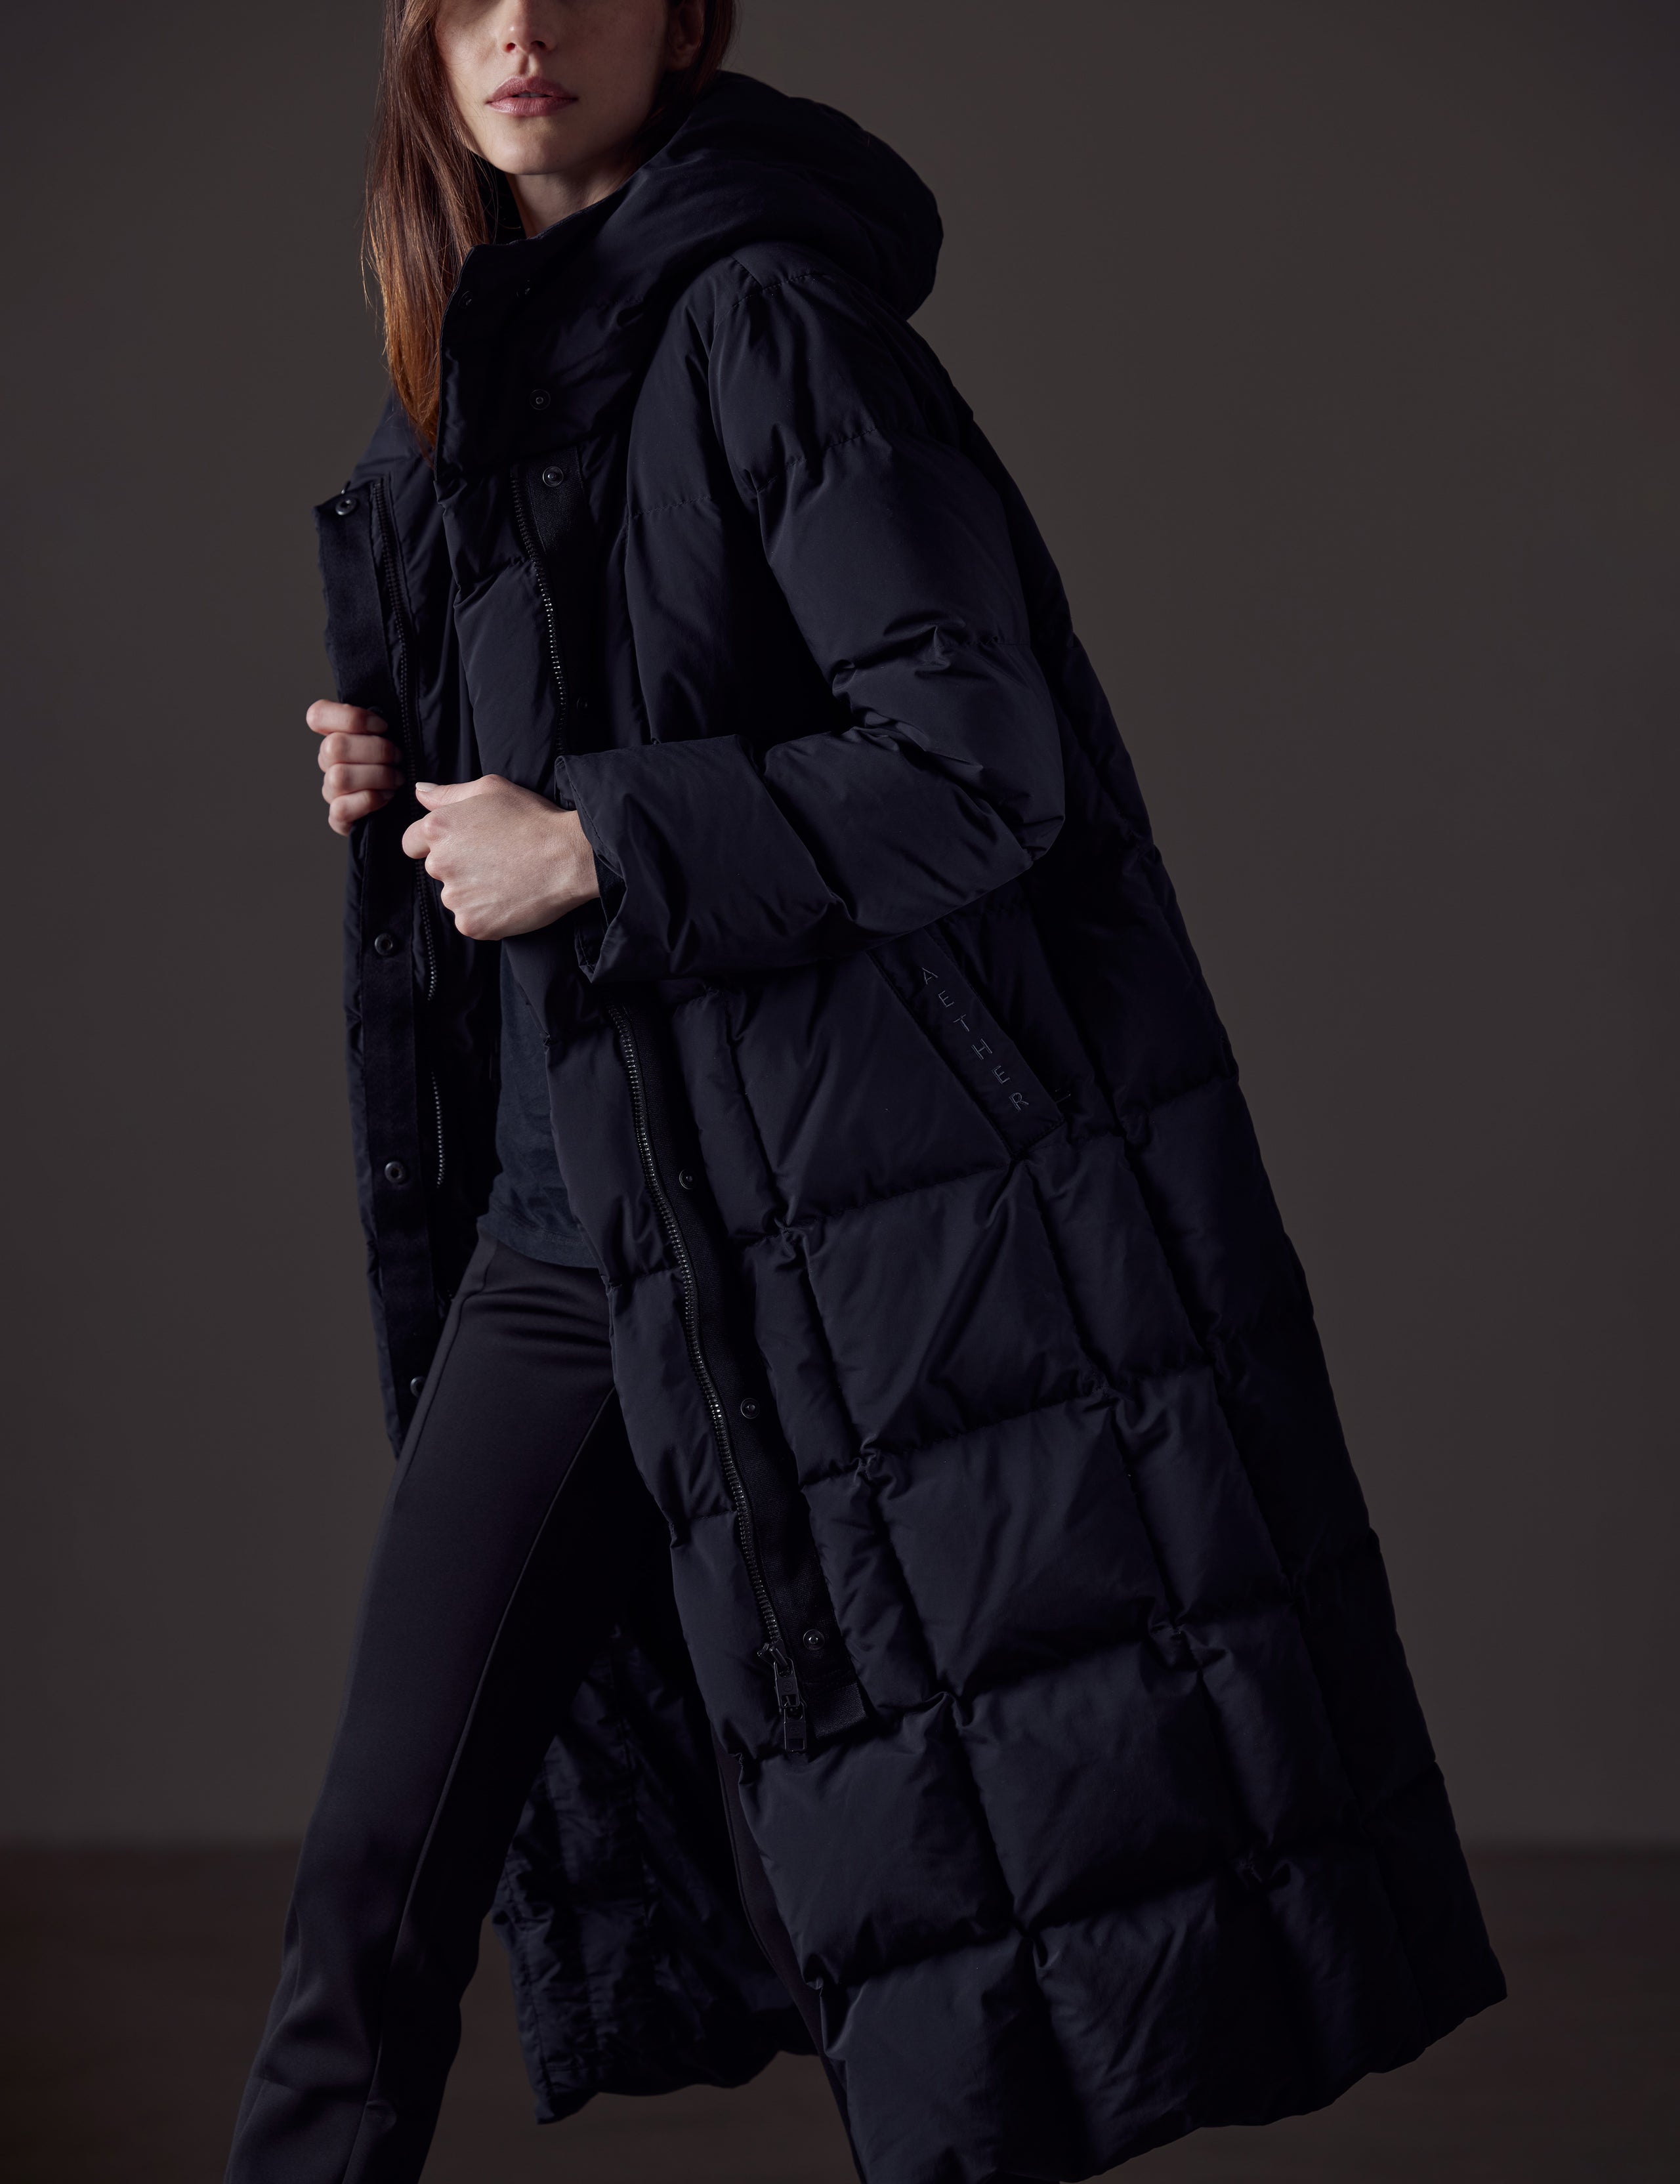 Woman wearing black winter jacket from AETHER Apparel 